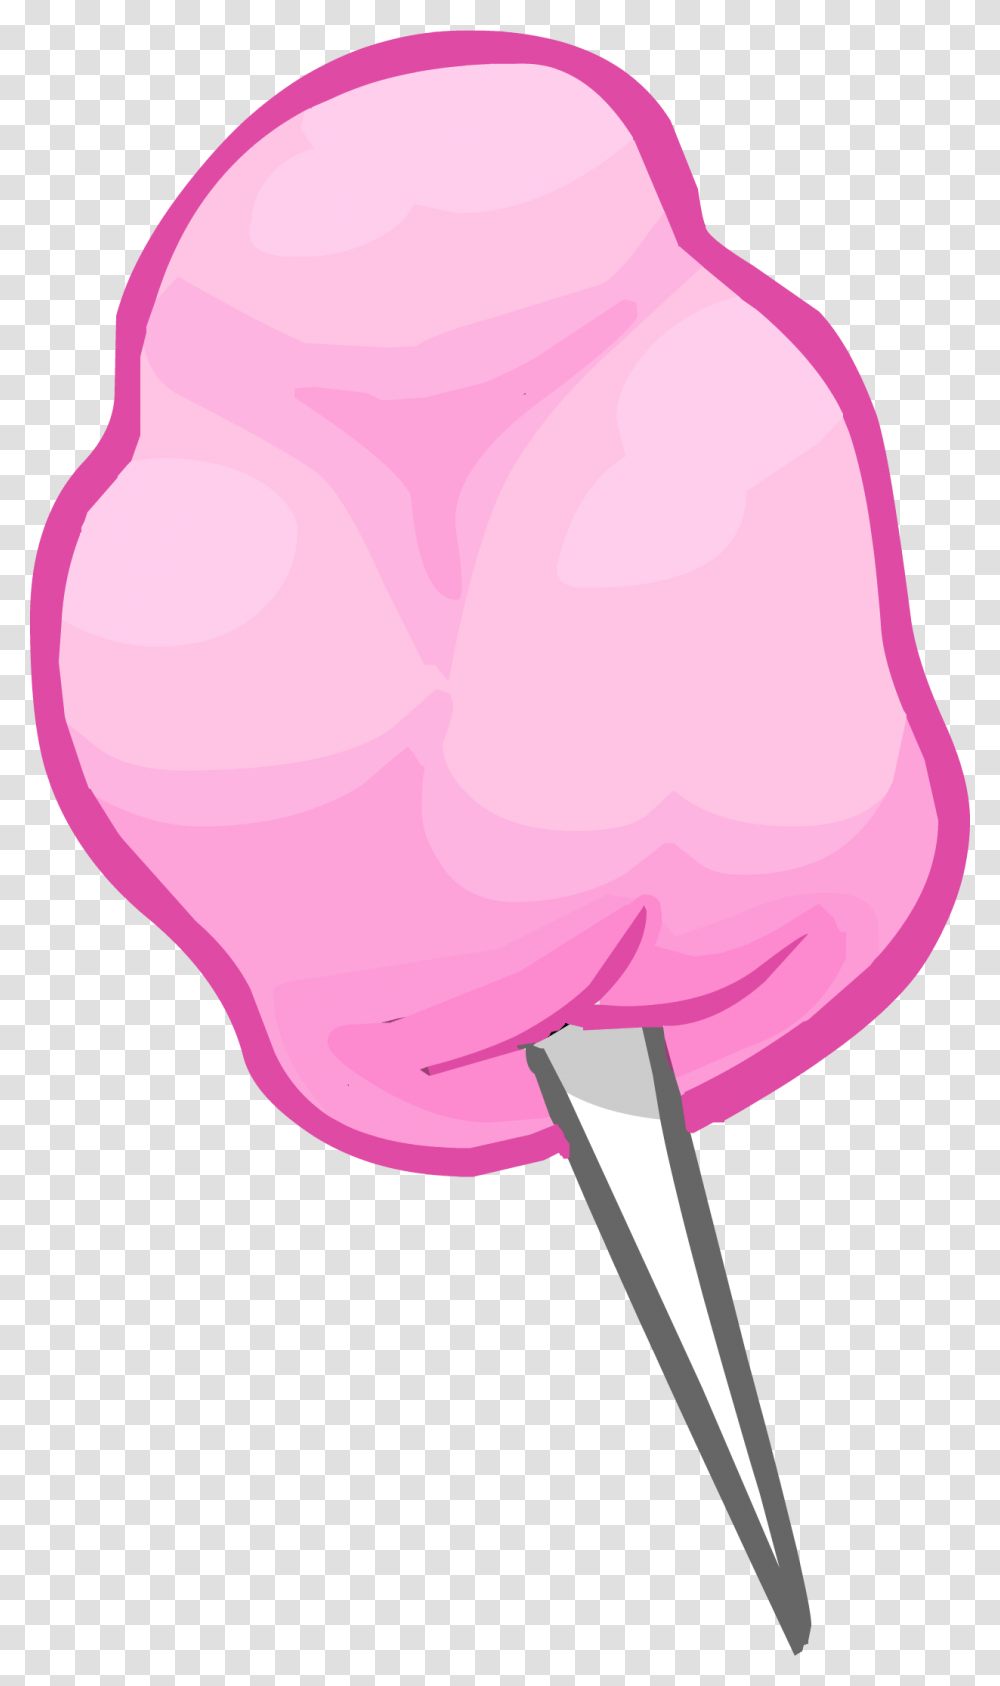 Cotton Candy Clipart 2 Cartoon Pink Cotton Candy, Sweets, Food, Confectionery, Cushion Transparent Png